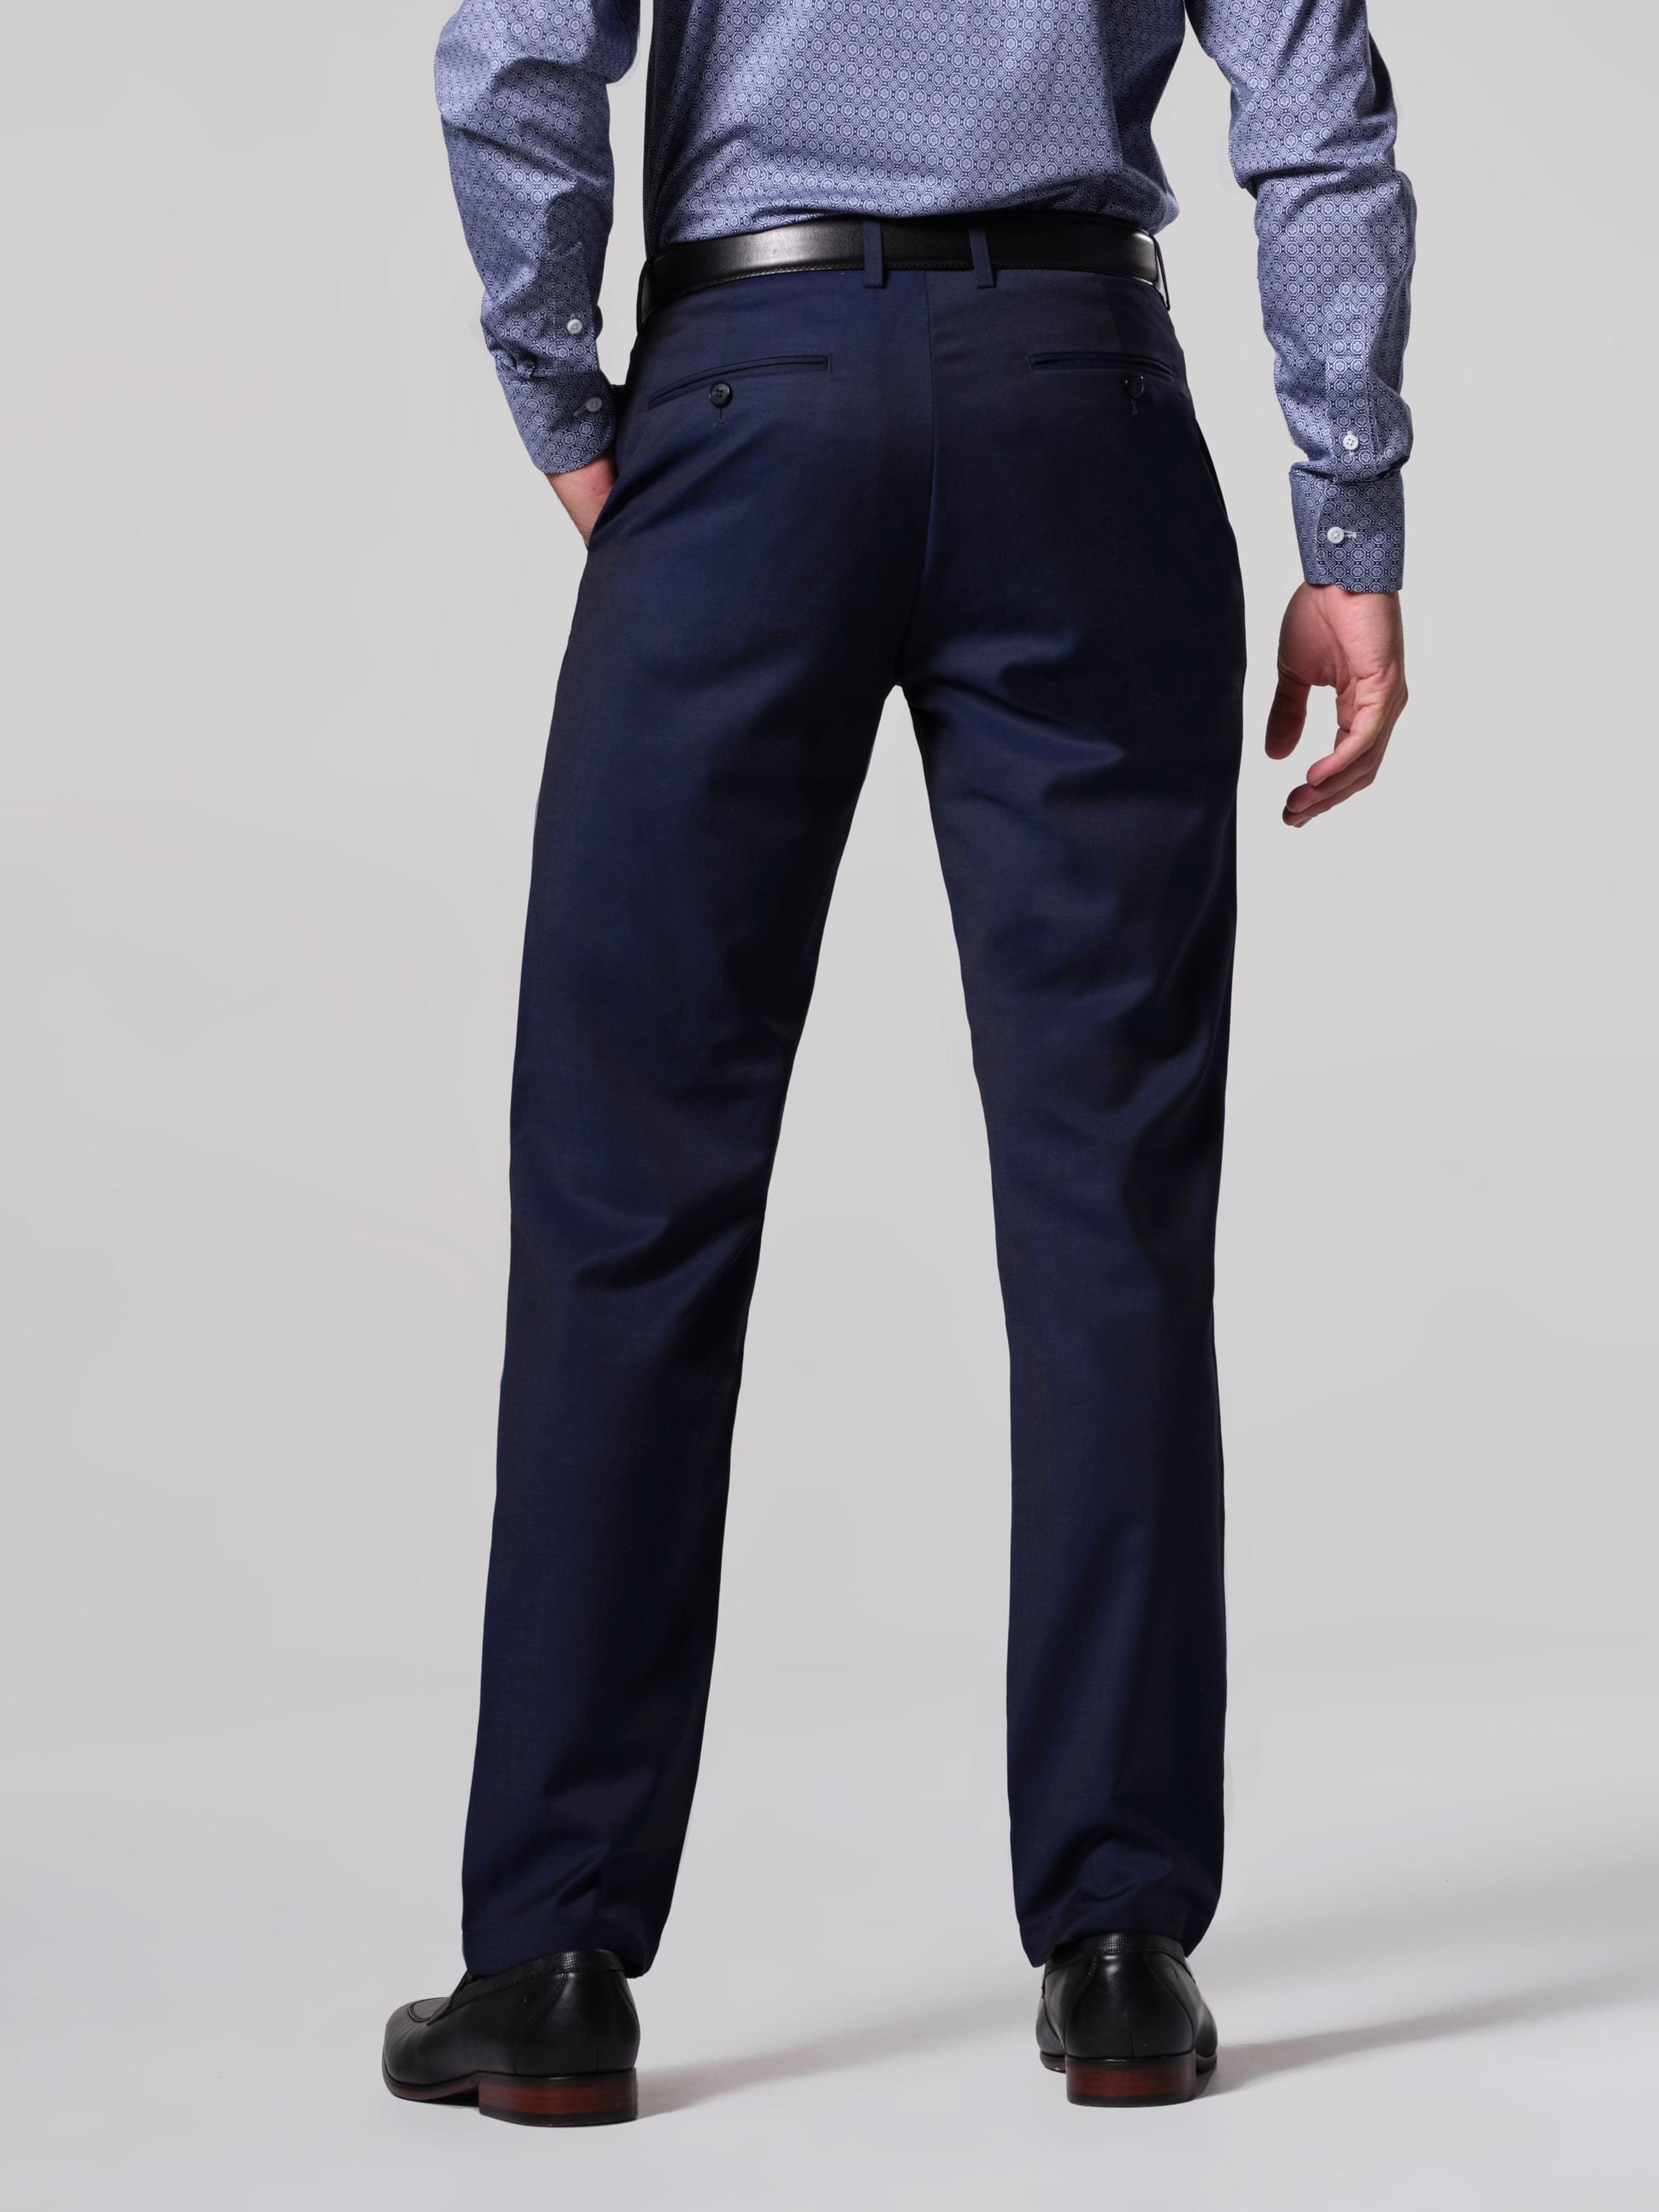 Navy Dress Pants with Dark Purple Dress Shirt Outfits For Men (13 ideas &  outfits) | Lookastic